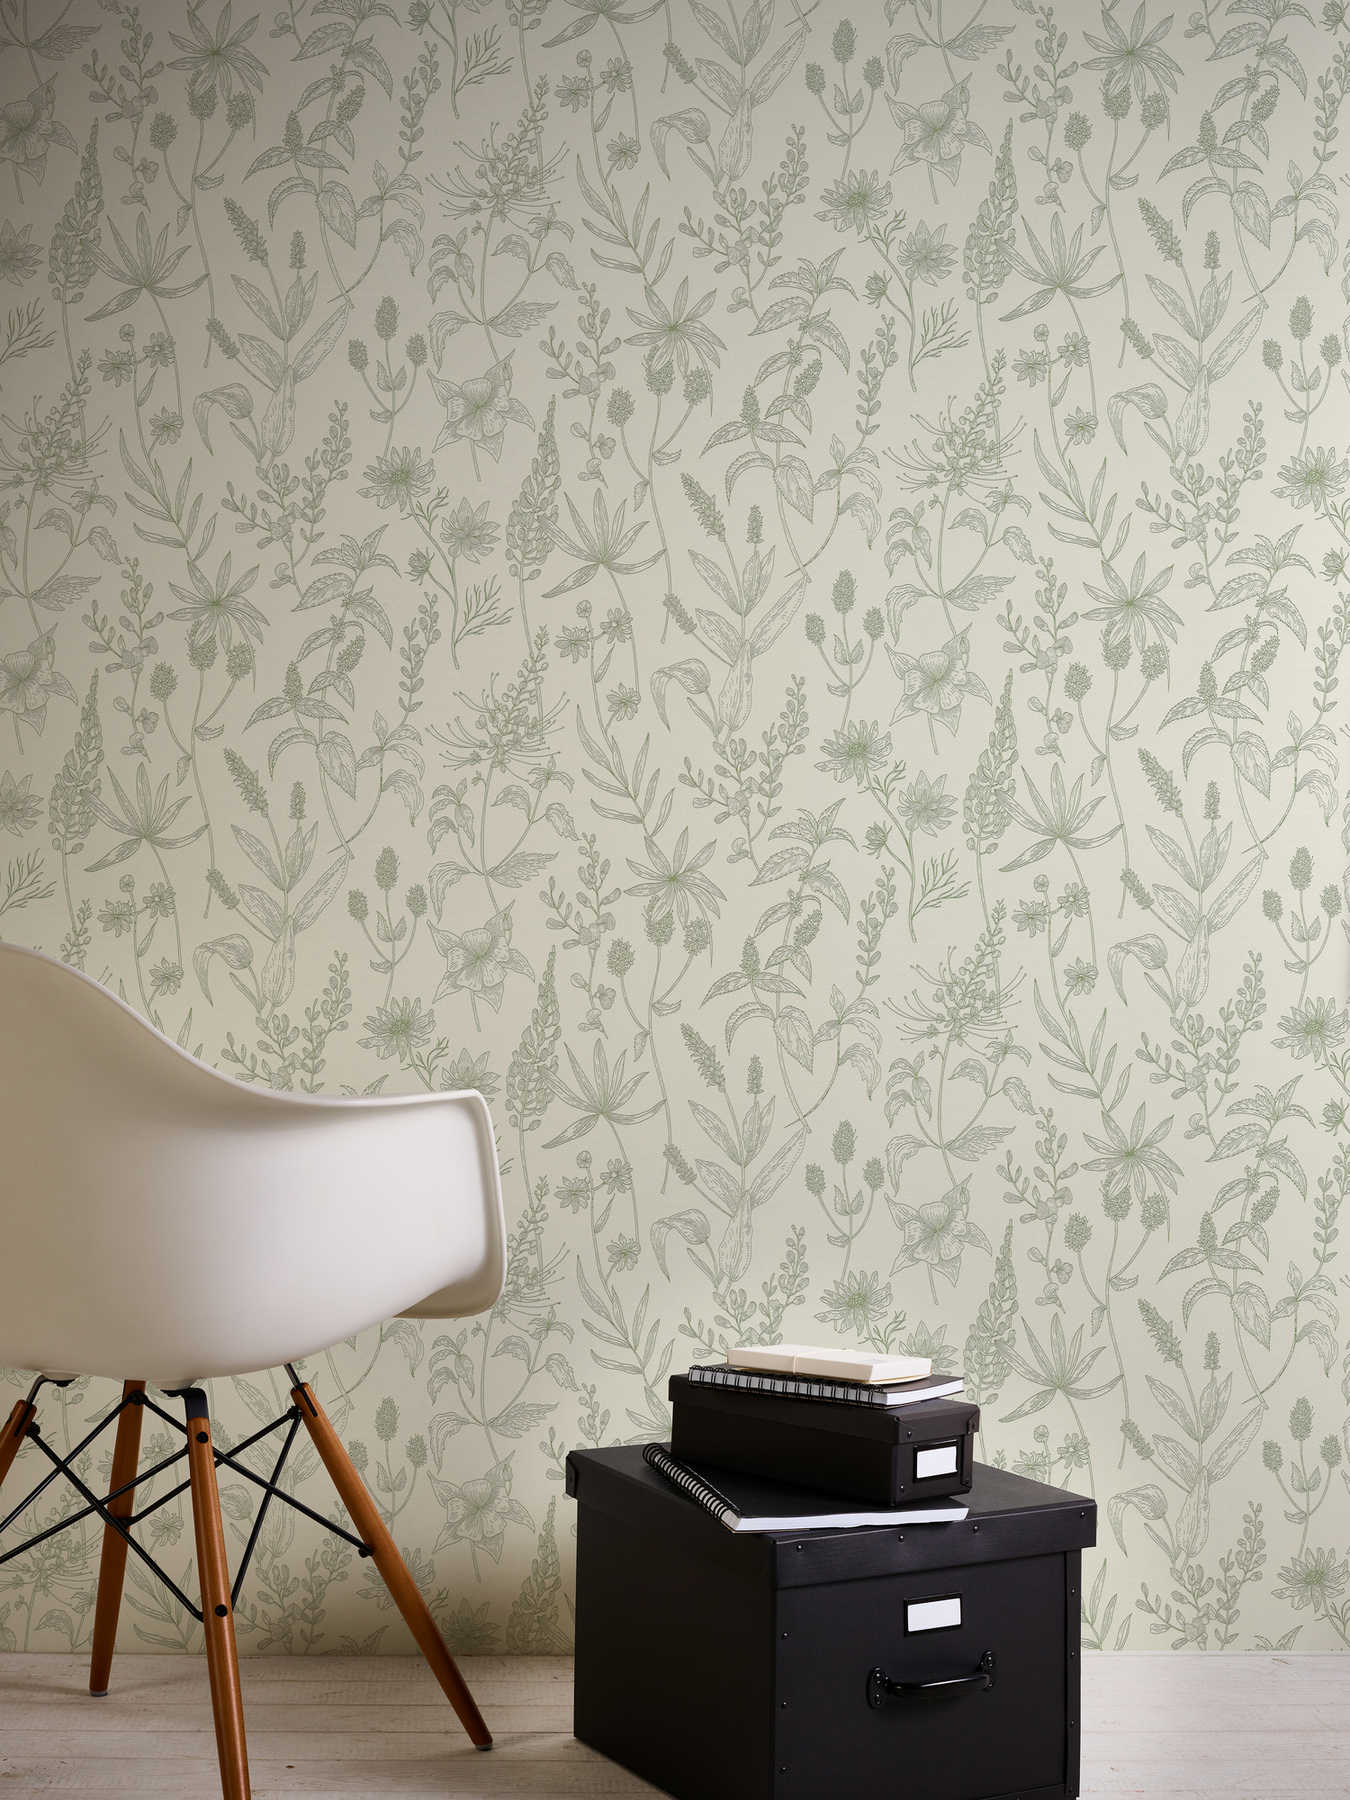             Non-woven wallpaper with floral pattern and metallic accent - green, silver, white
        